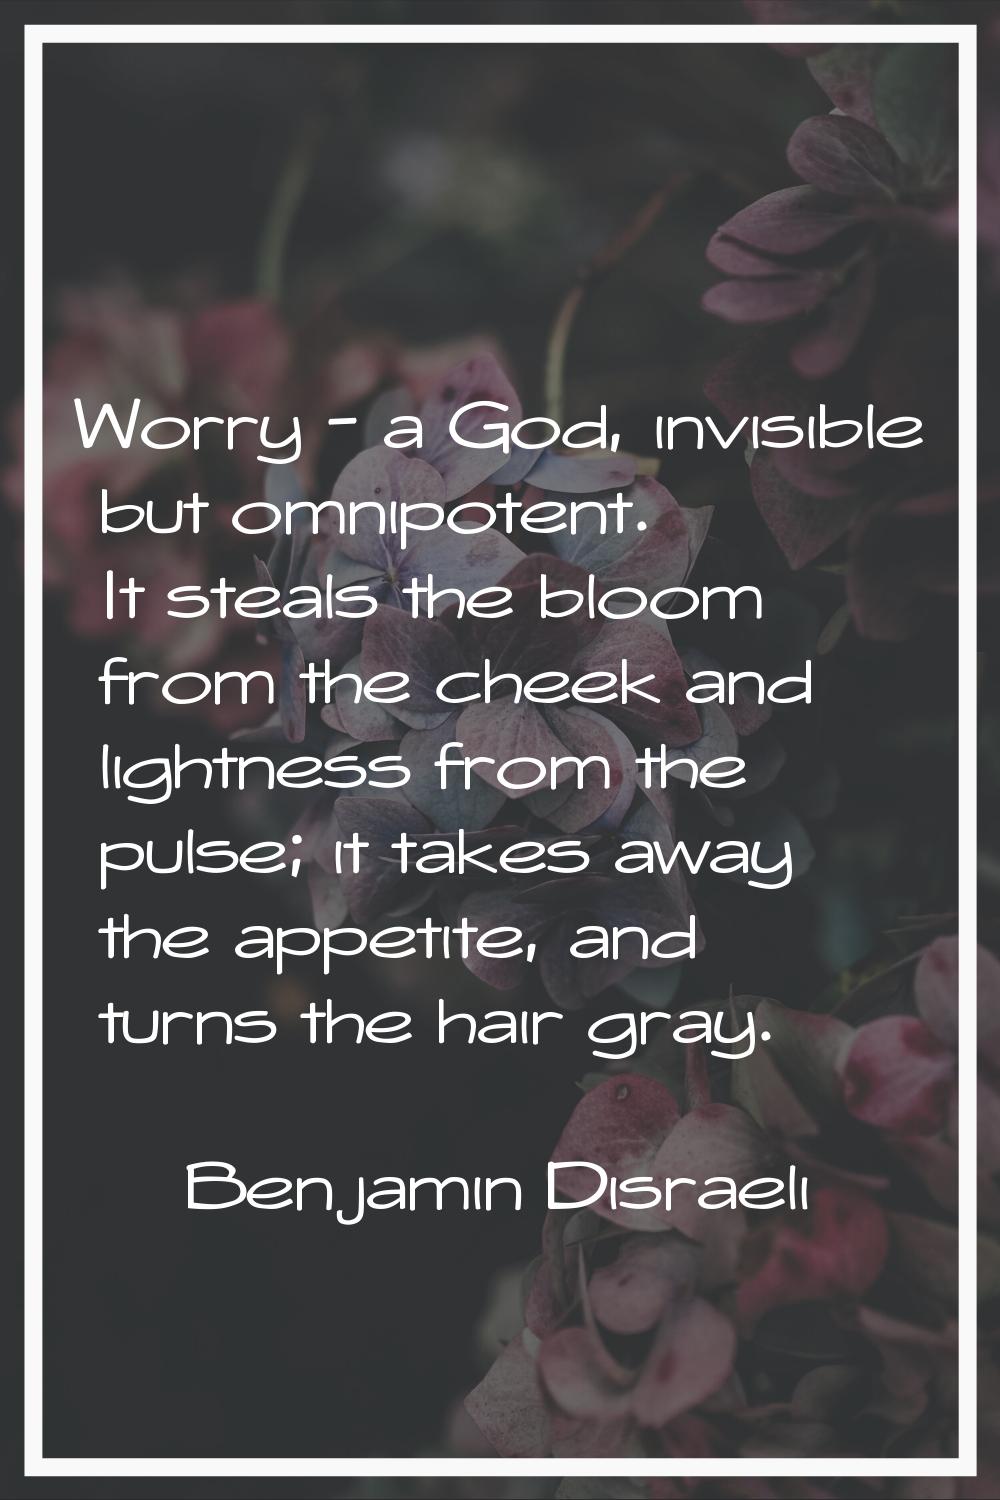 Worry - a God, invisible but omnipotent. It steals the bloom from the cheek and lightness from the 